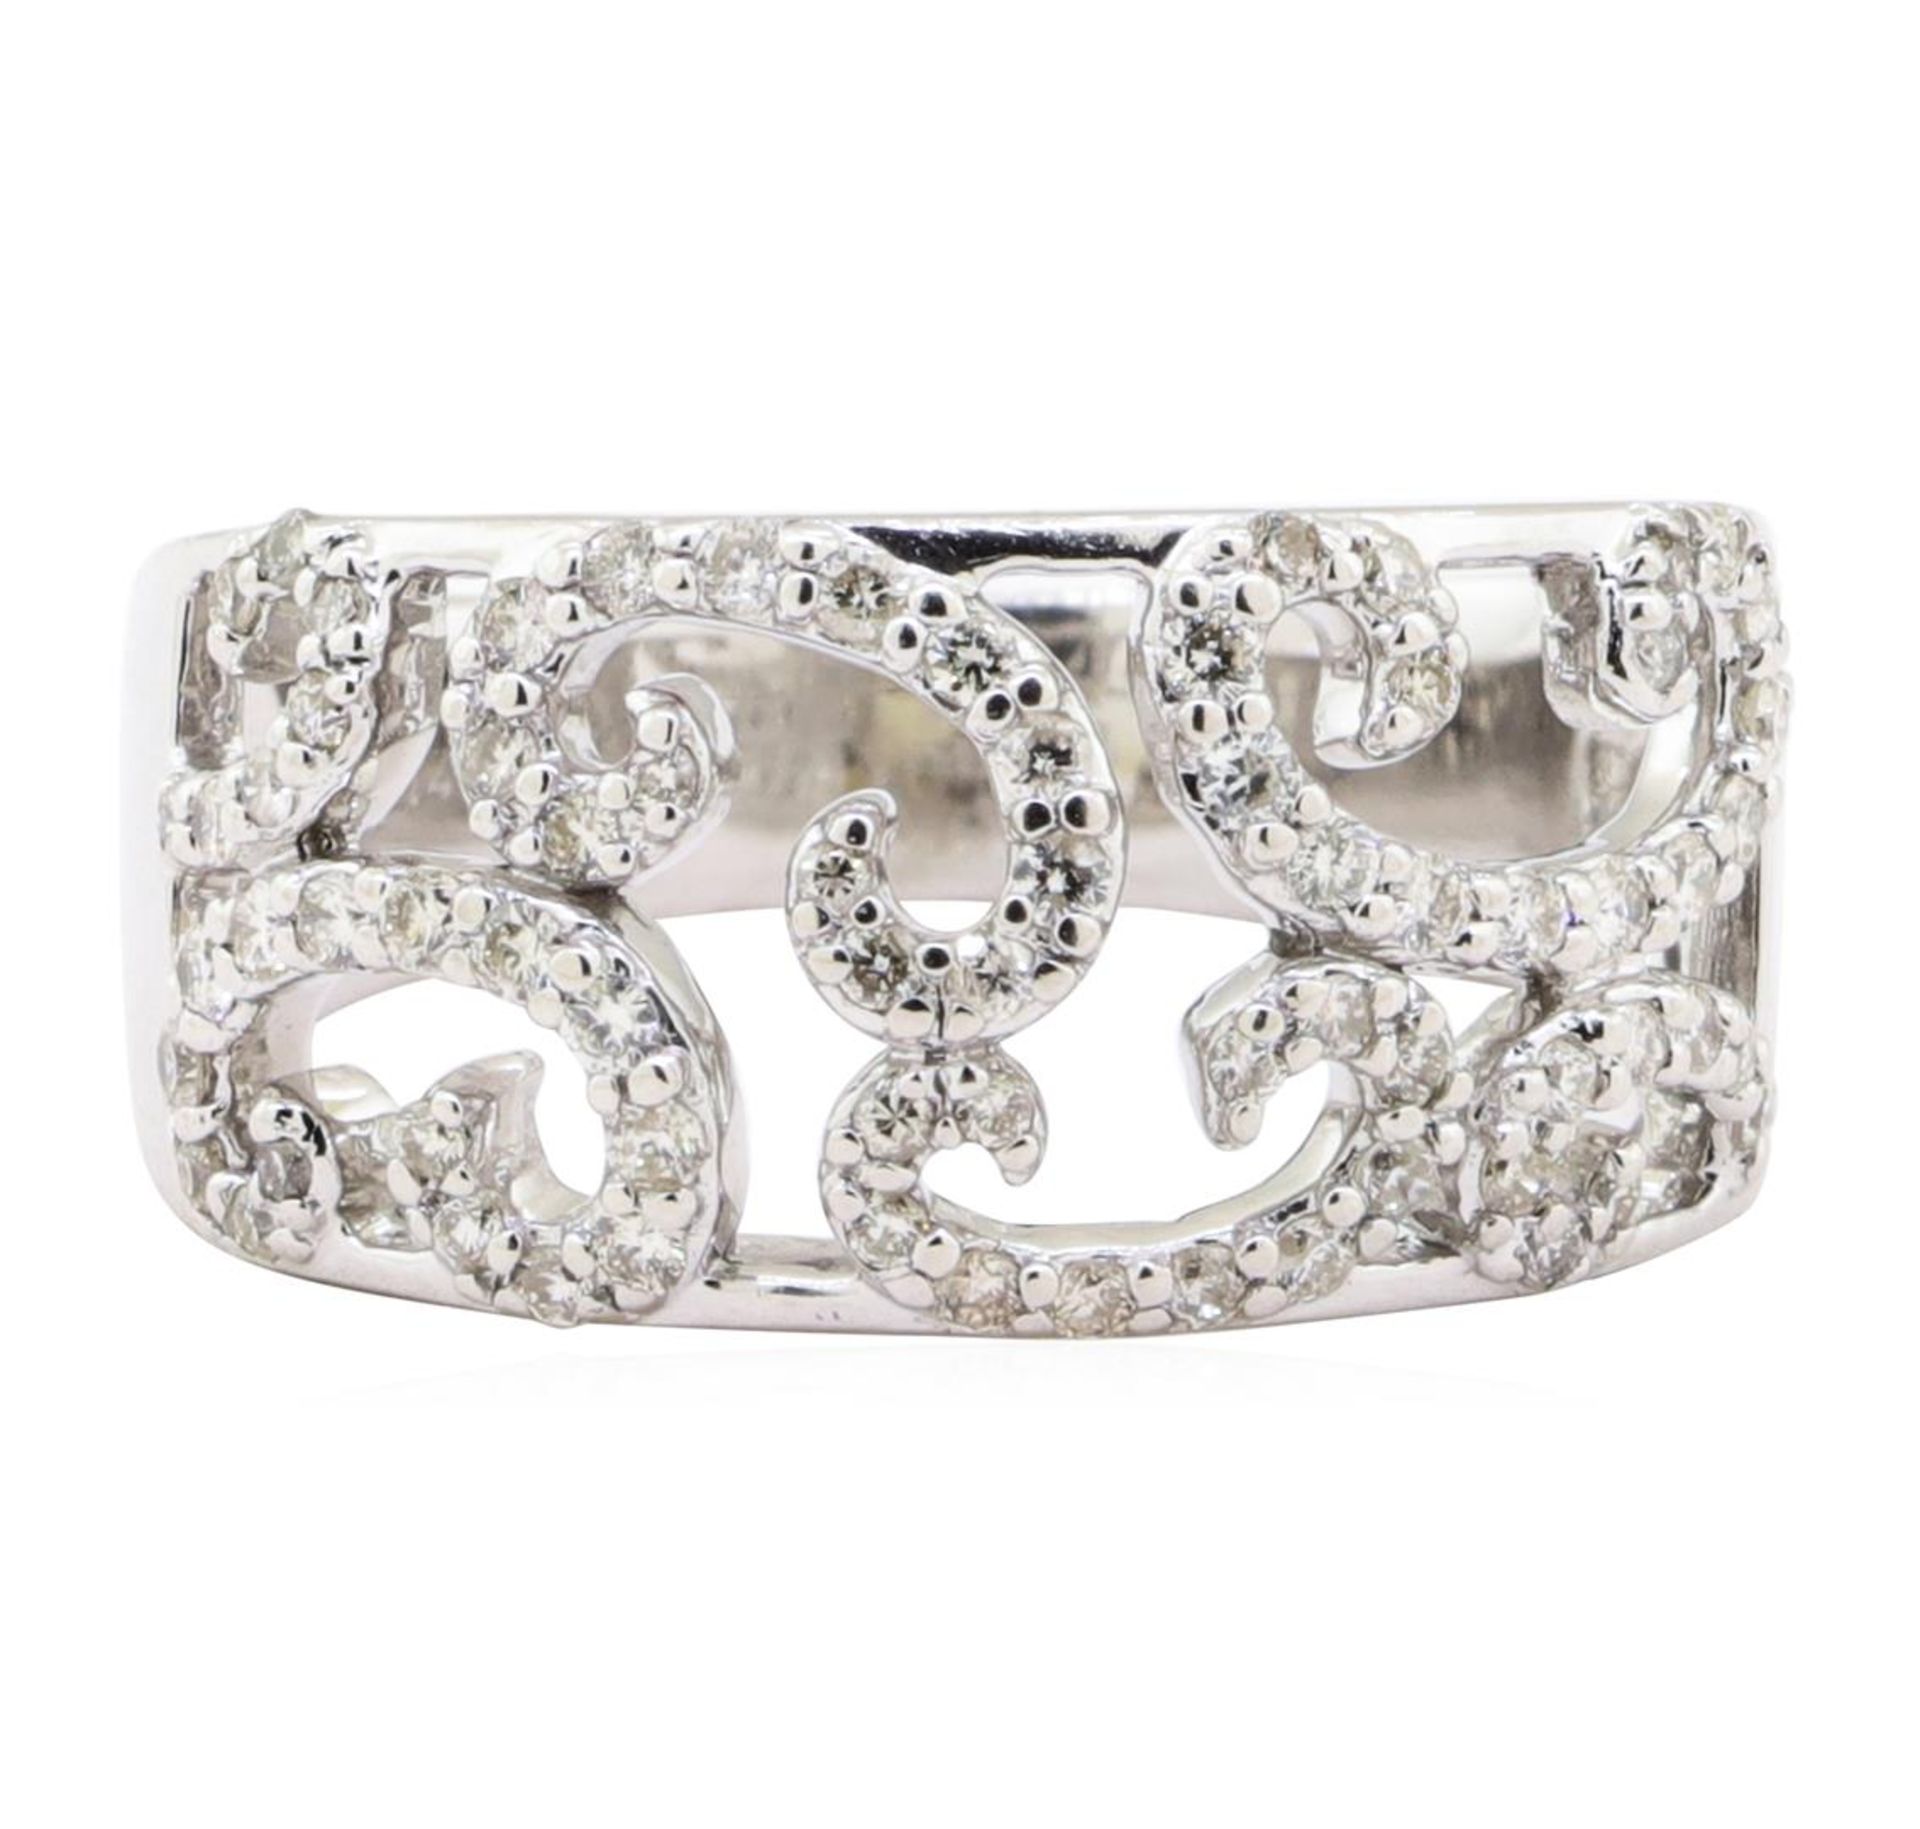 0.58 ctw Diamond Half-Dome Band - 14KT White Gold - Image 2 of 4